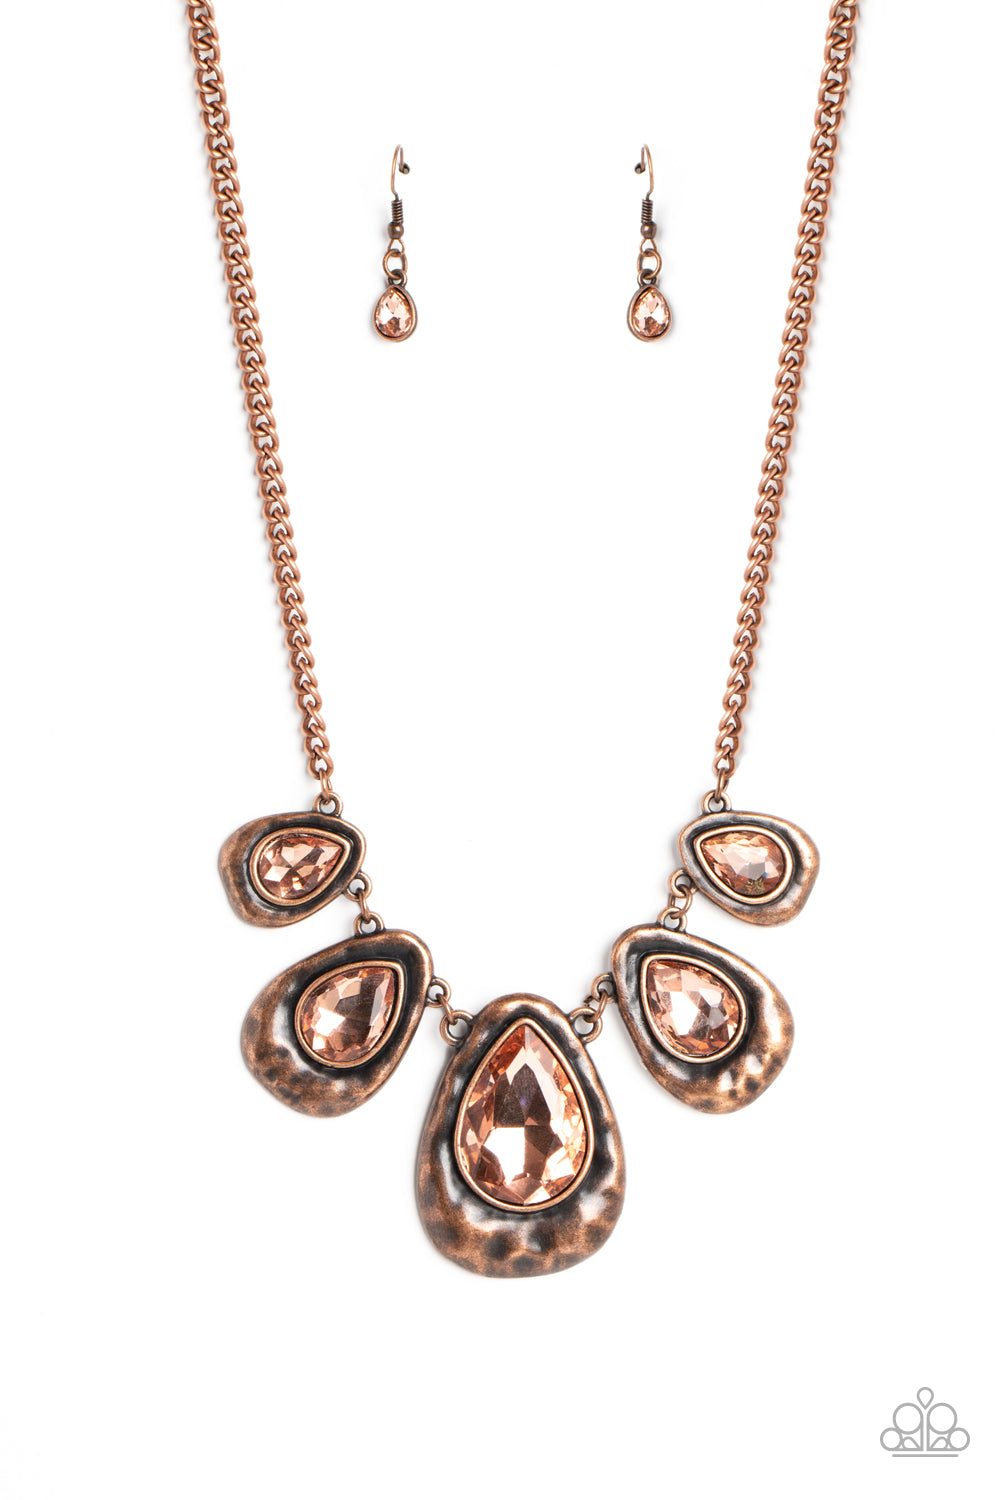 Paparazzi Accessories - Formally Forged - Copper Teardrop Necklace delicately hammered in shimmer, a collection of antiqued copper teardrops link below the collar for an edgy statement-making look. Set in each hammered frame, faceted, peachy teardrop gems add a dramatic pop of color to the design. Features an adjustable clasp closure.  Sold as one individual necklace. Includes one pair of matching earrings.